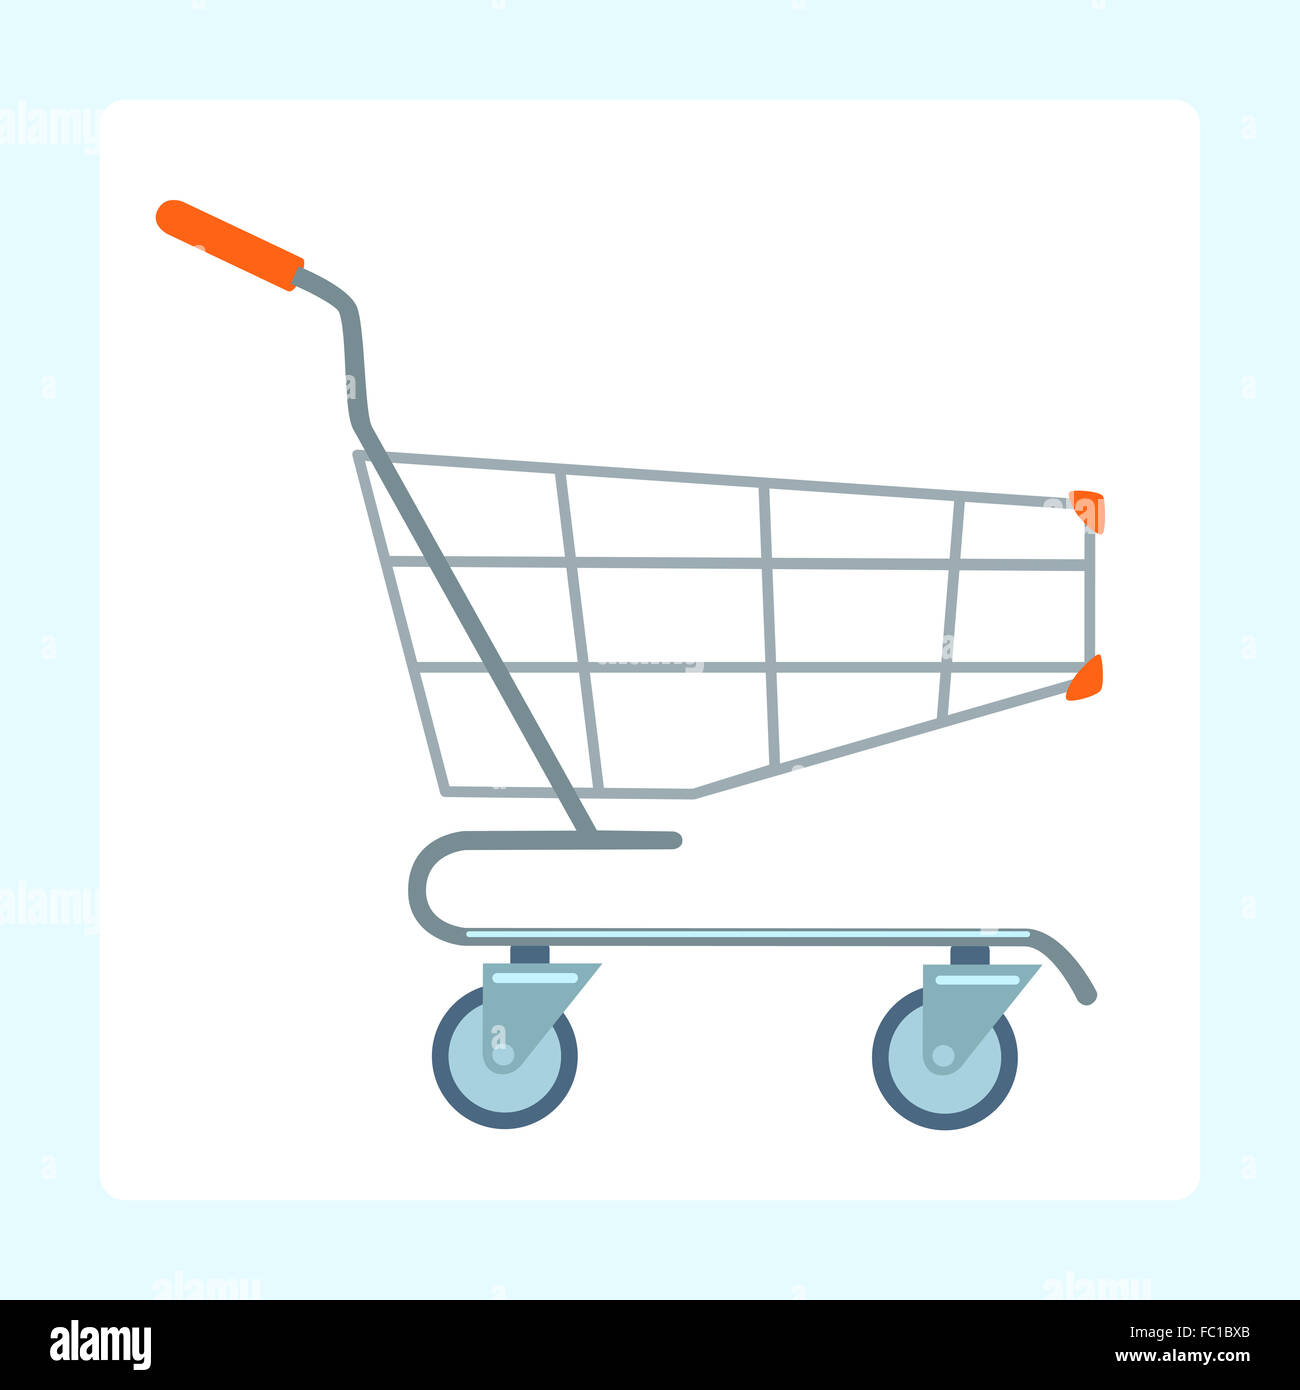 Grocery cart on wheels Stock Photo